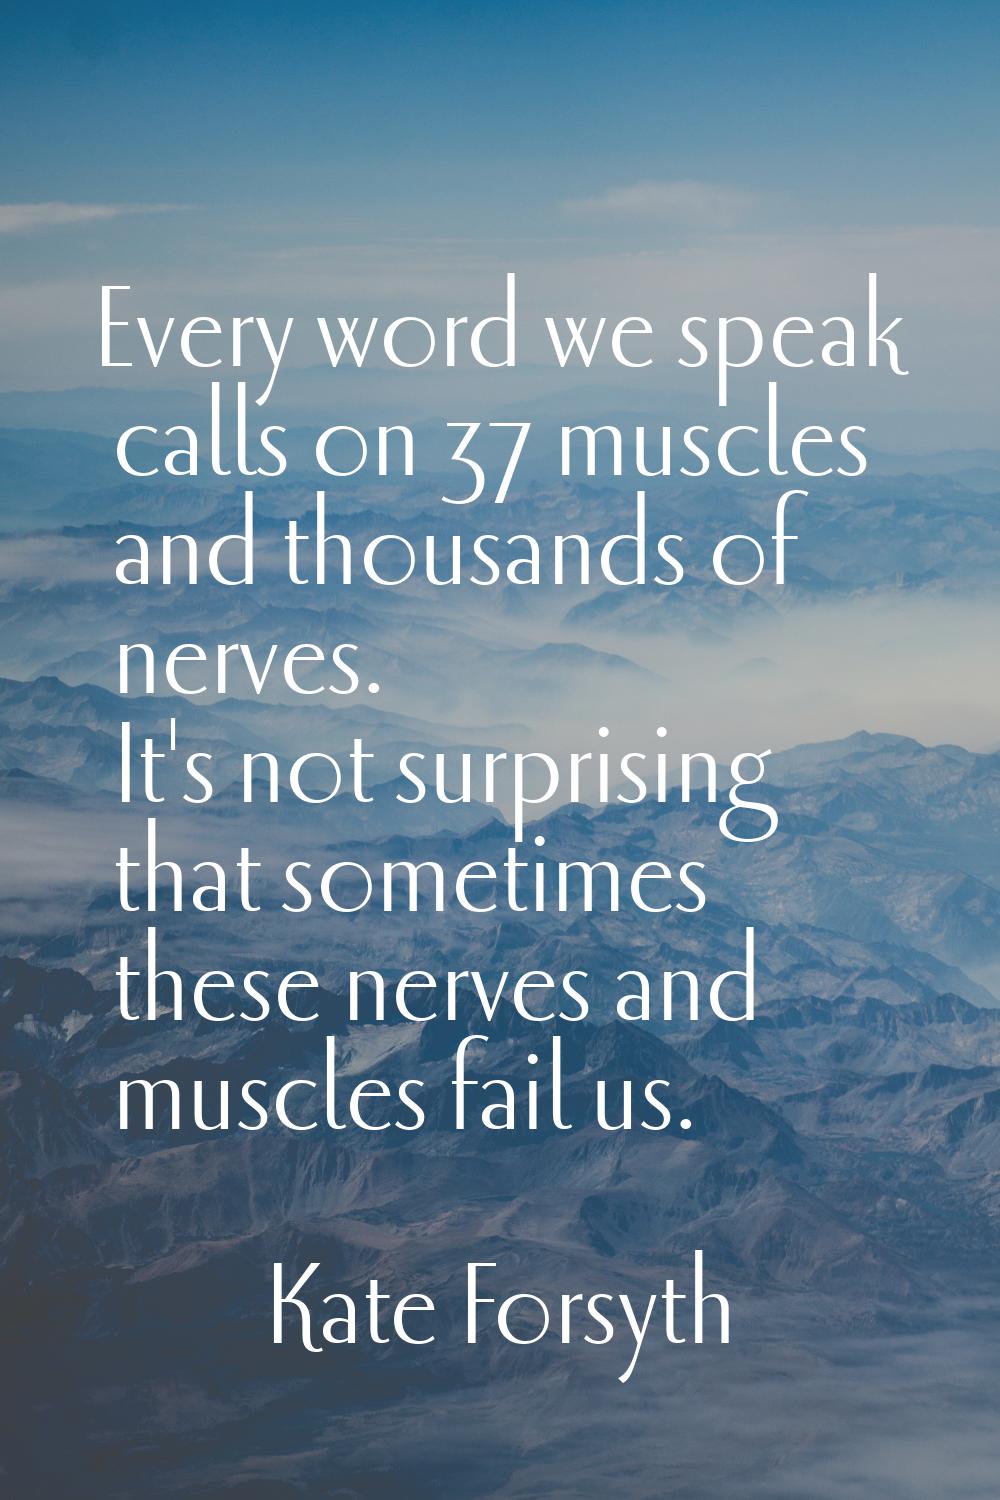 Every word we speak calls on 37 muscles and thousands of nerves. It's not surprising that sometimes